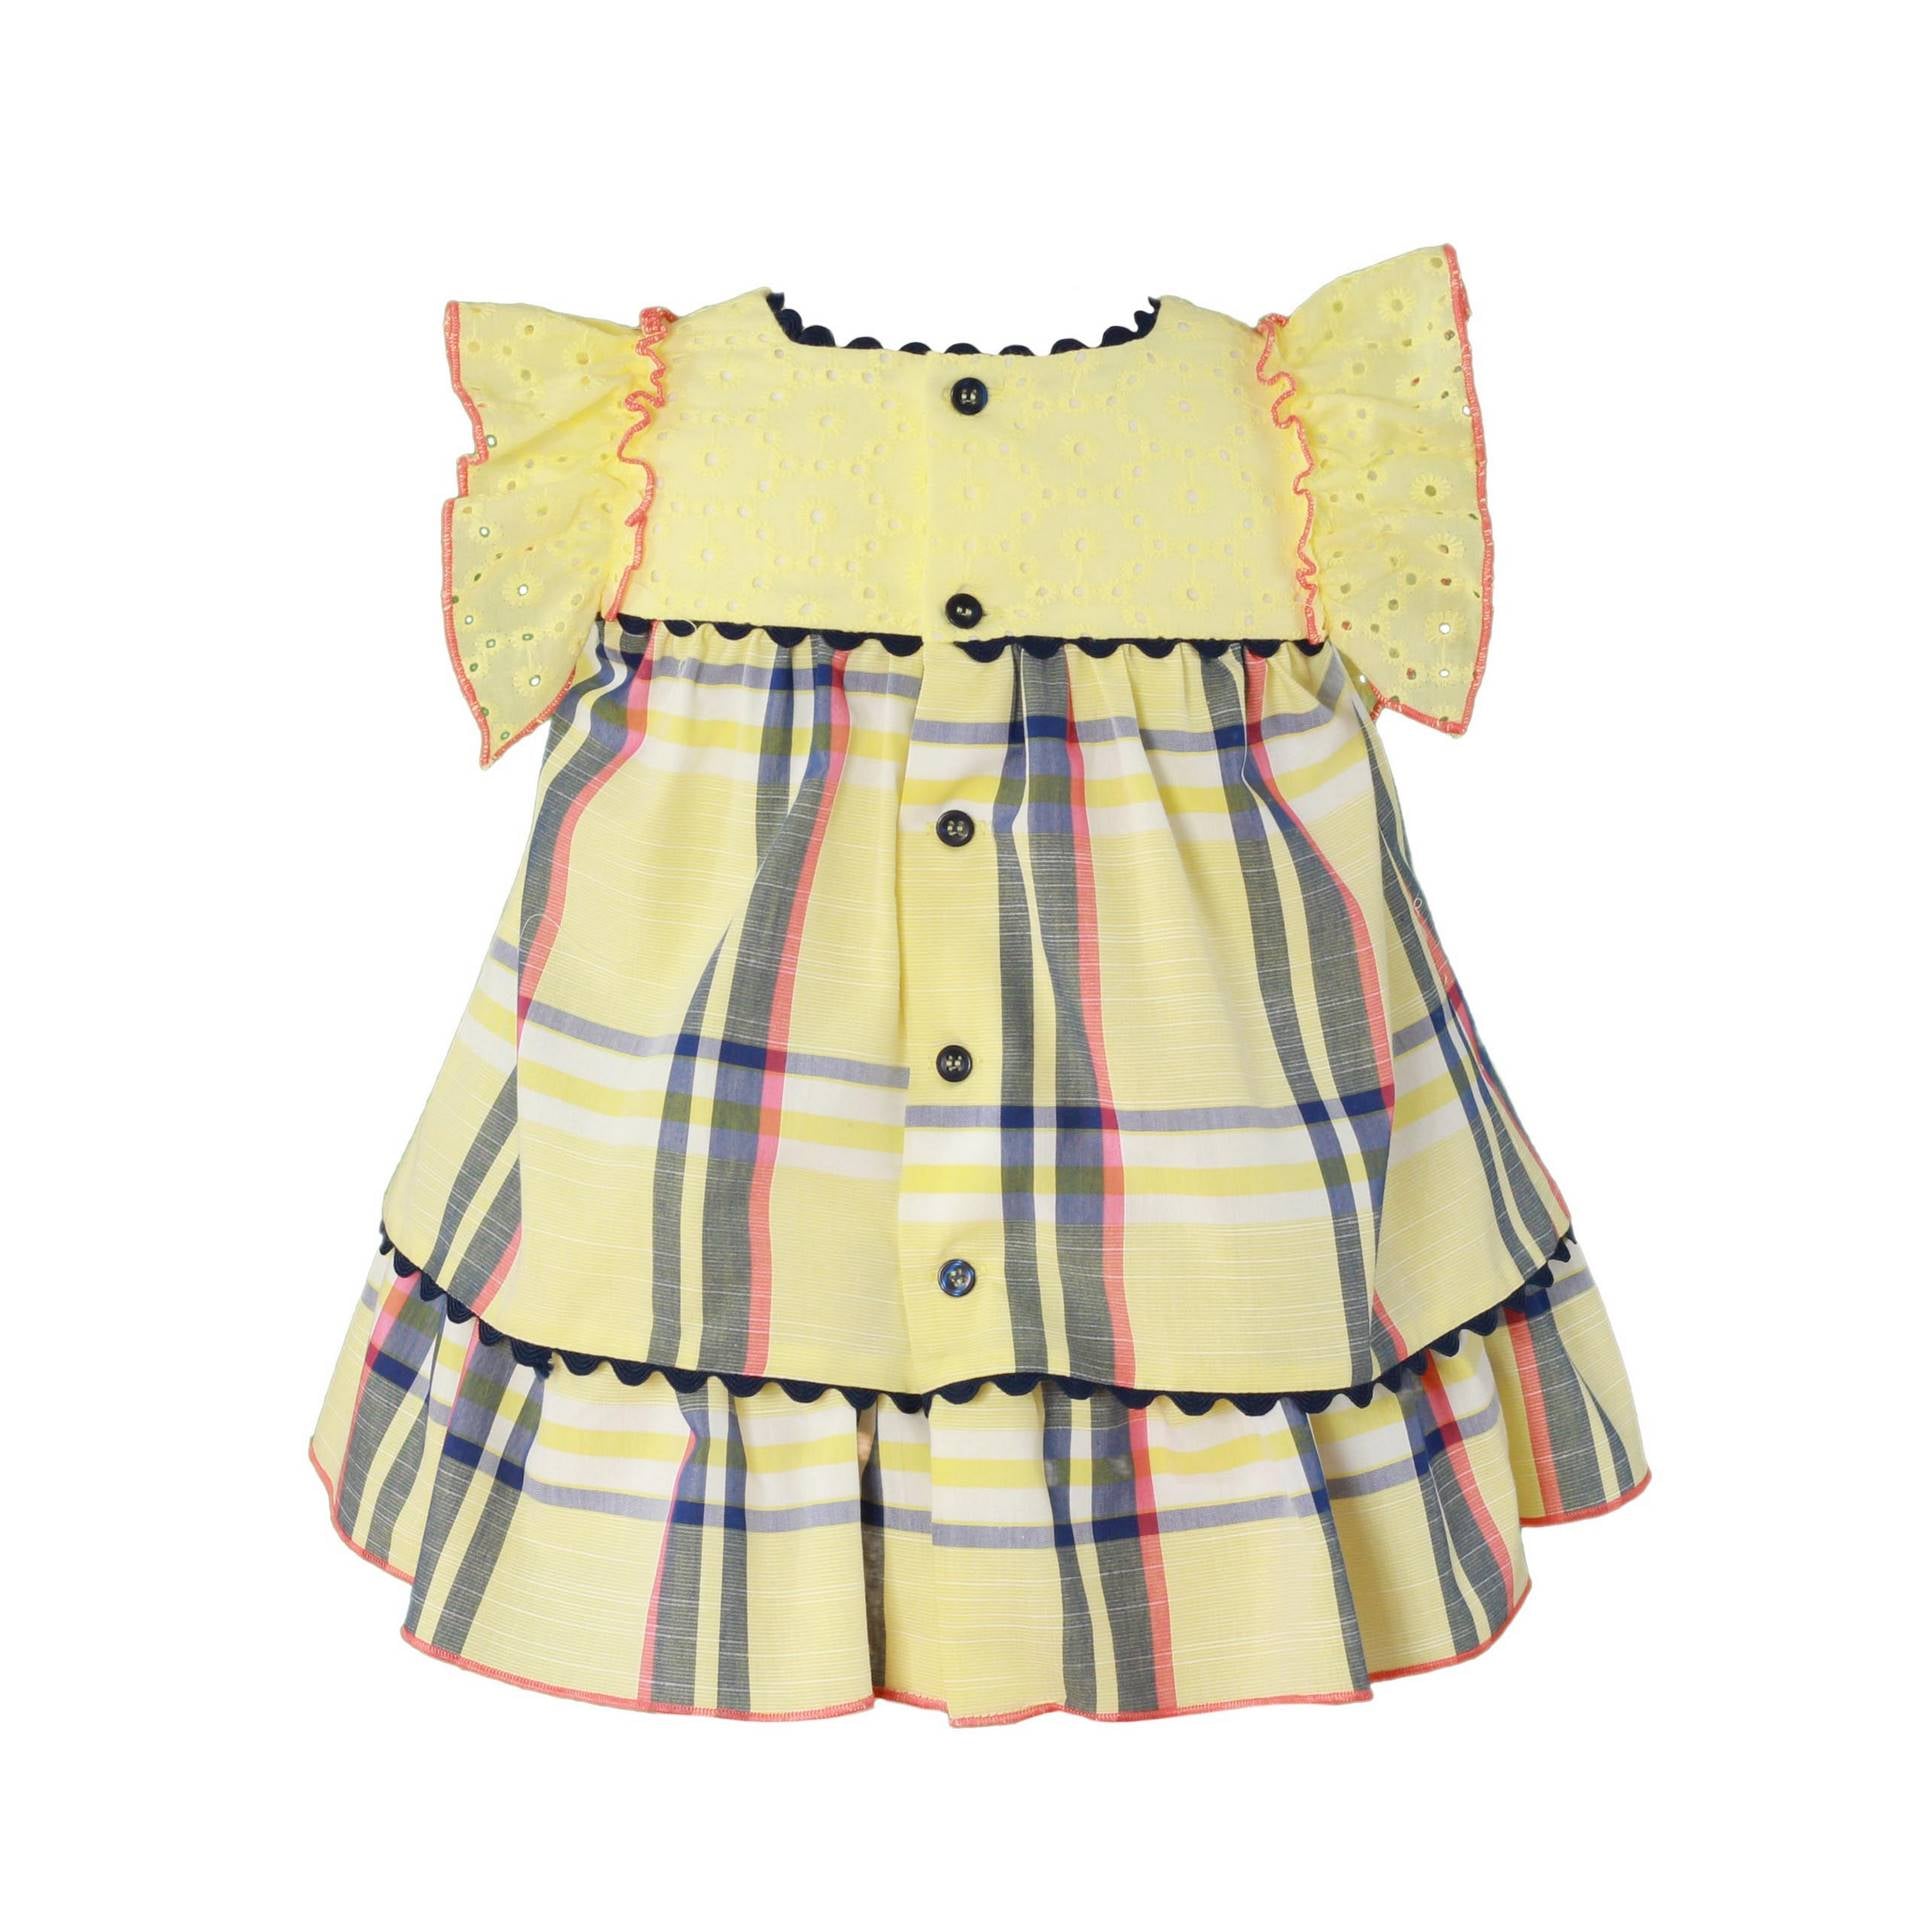 Yellow baby girl and toddler dress with ruffle detail. Soft and lightweight material for comfortable to wear